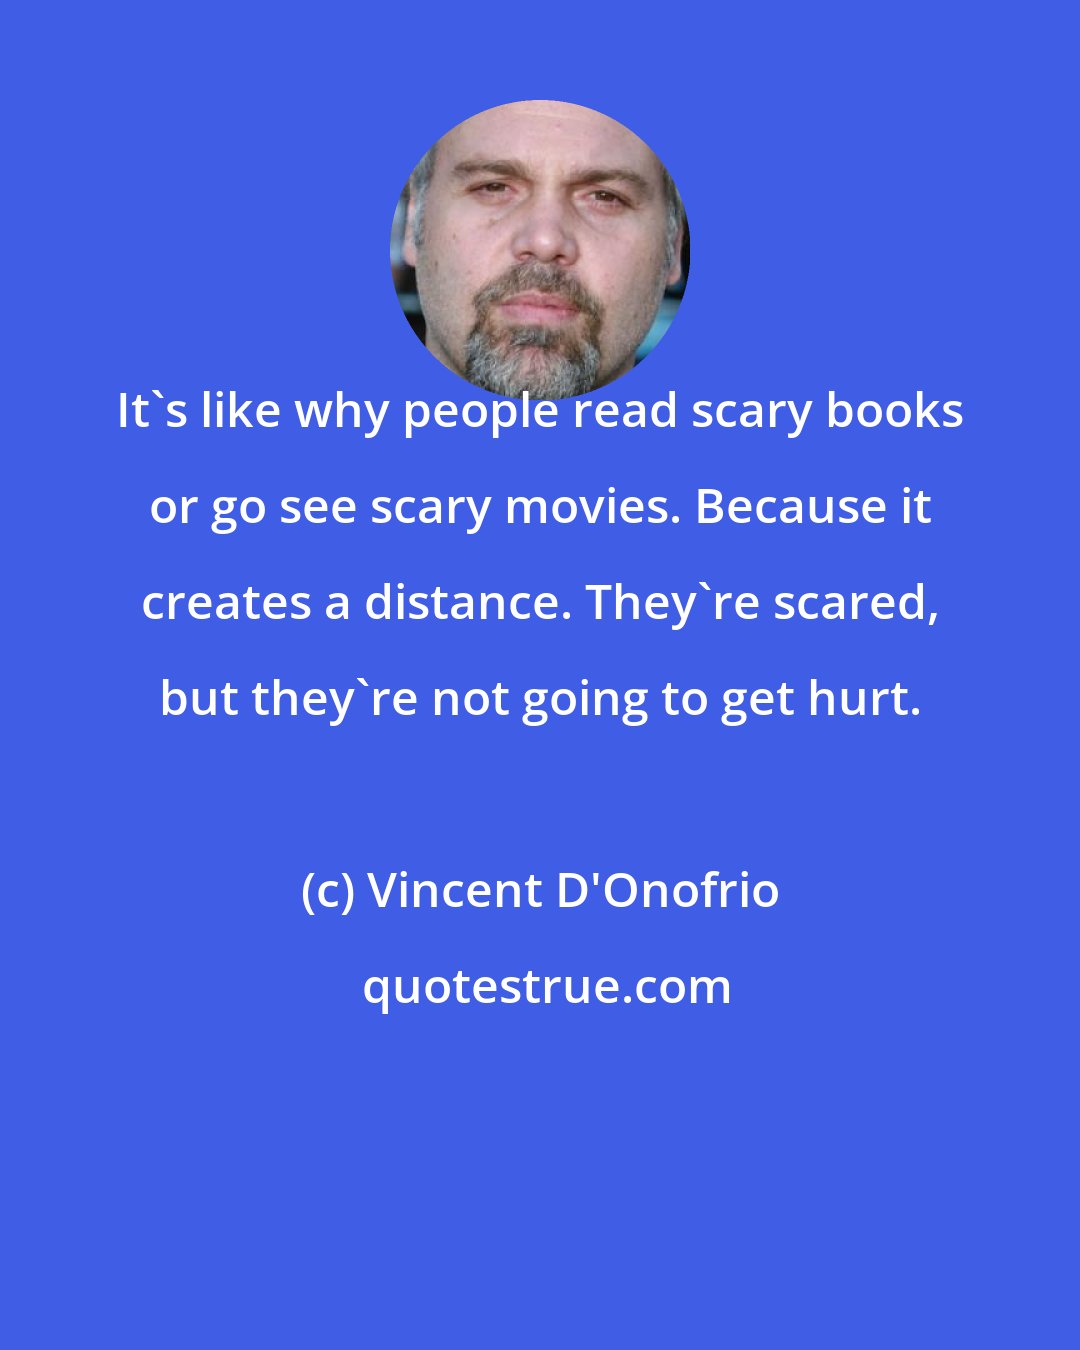 Vincent D'Onofrio: It's like why people read scary books or go see scary movies. Because it creates a distance. They're scared, but they're not going to get hurt.